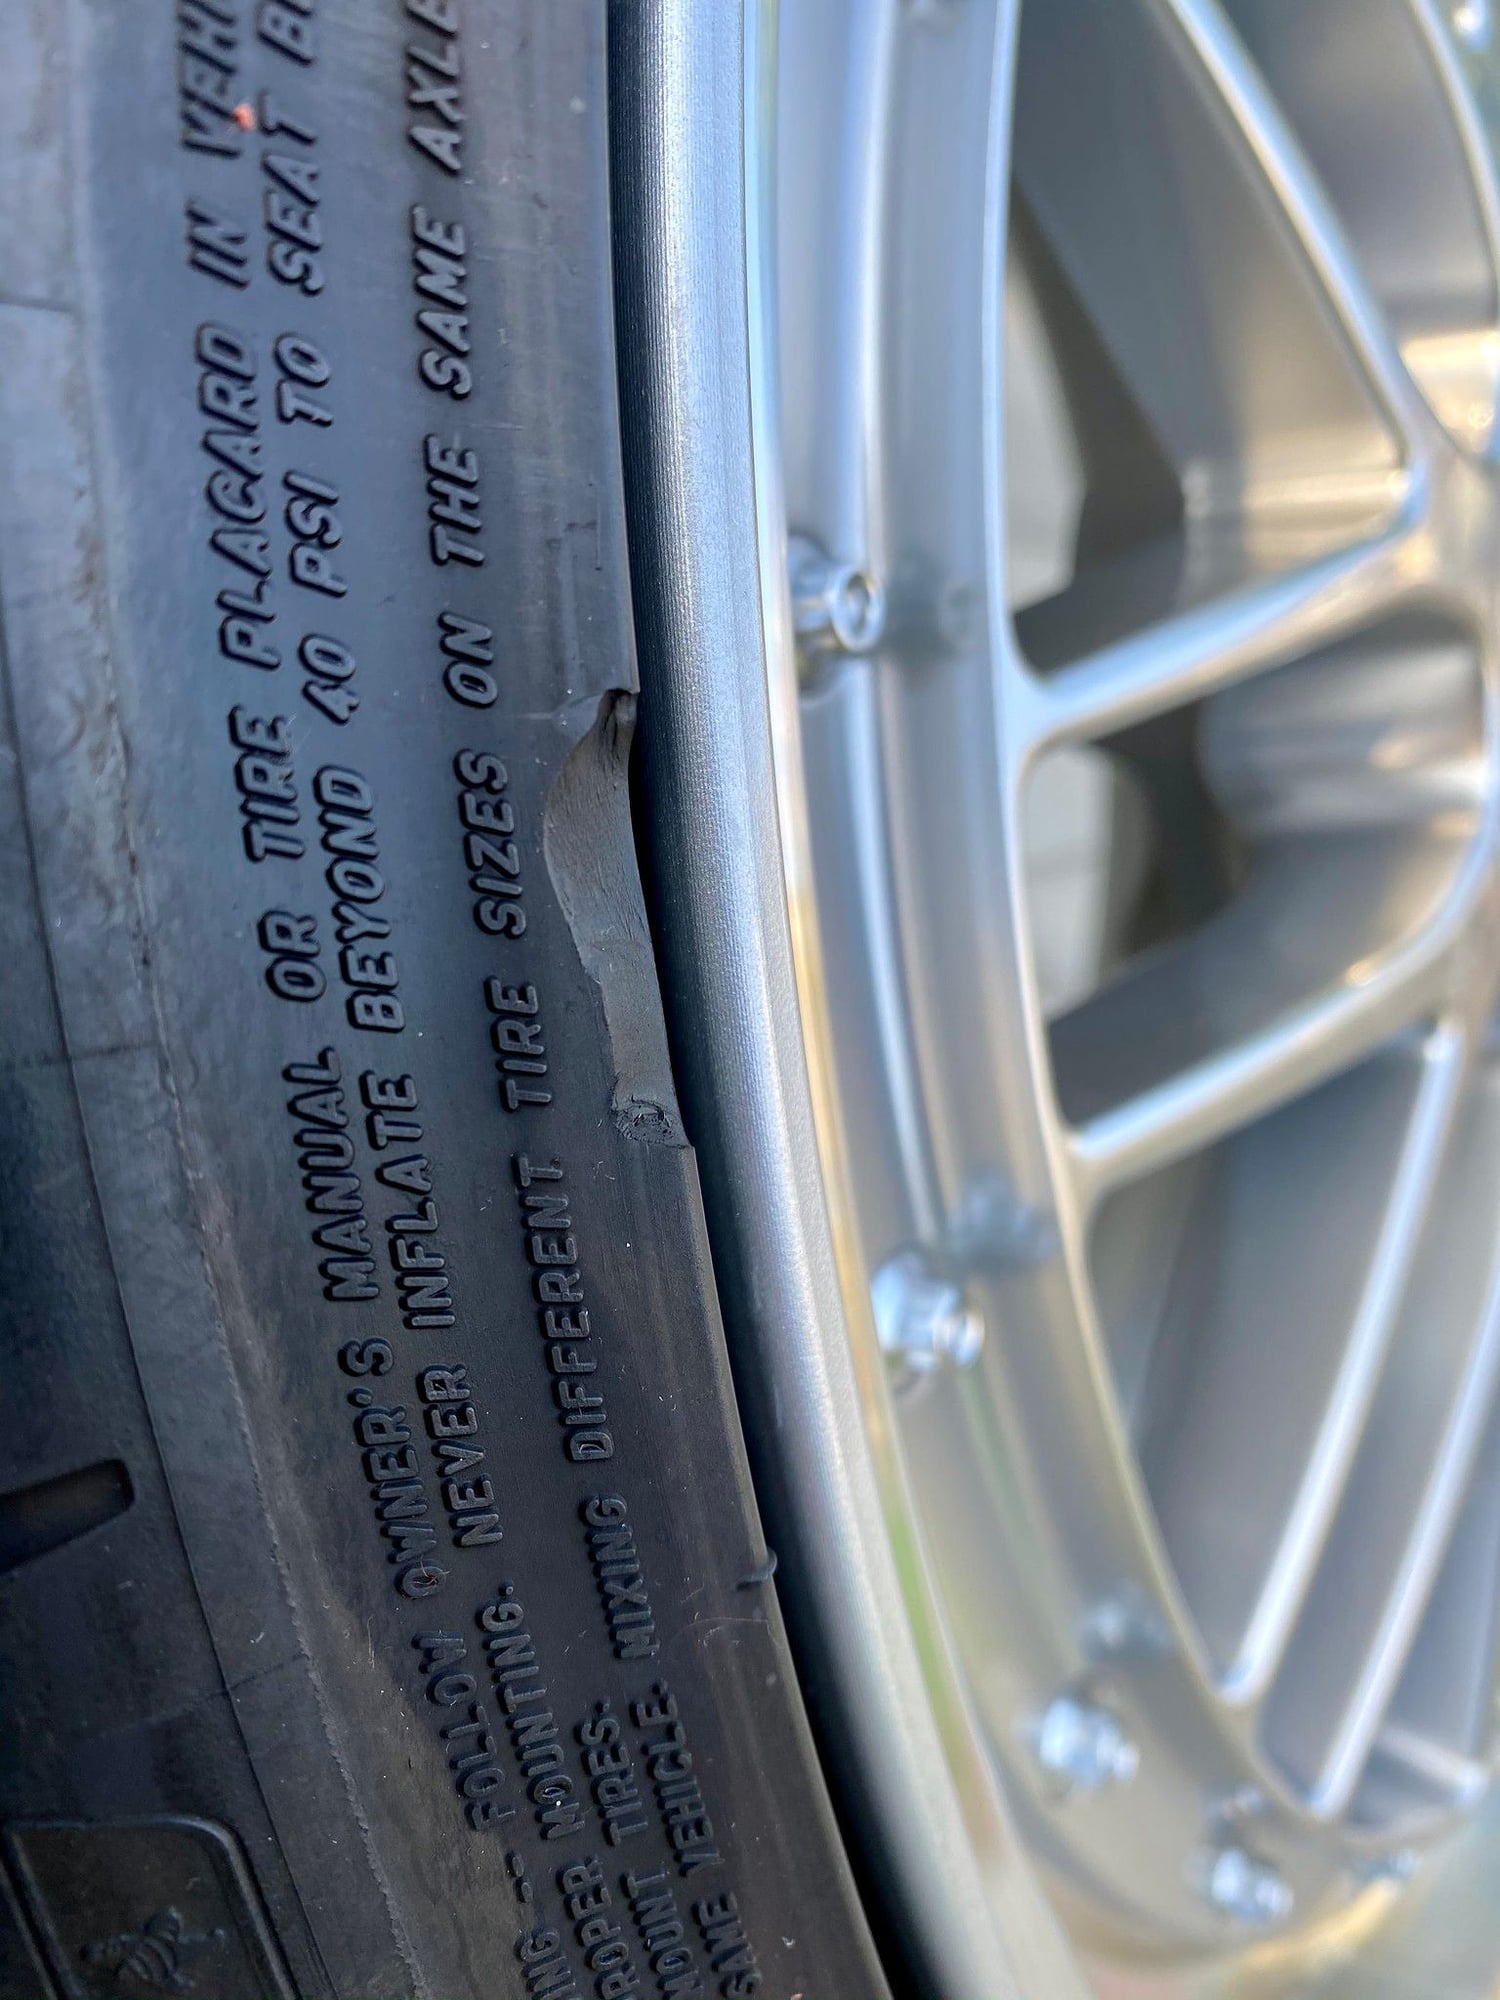 2018 Audi S4 - BBS LM 20"x8.5" ET38 5x112 + 255/30/20 Michelin PS4S - Wheels and Tires/Axles - $3,800 - Los Angeles, CA 90066, United States